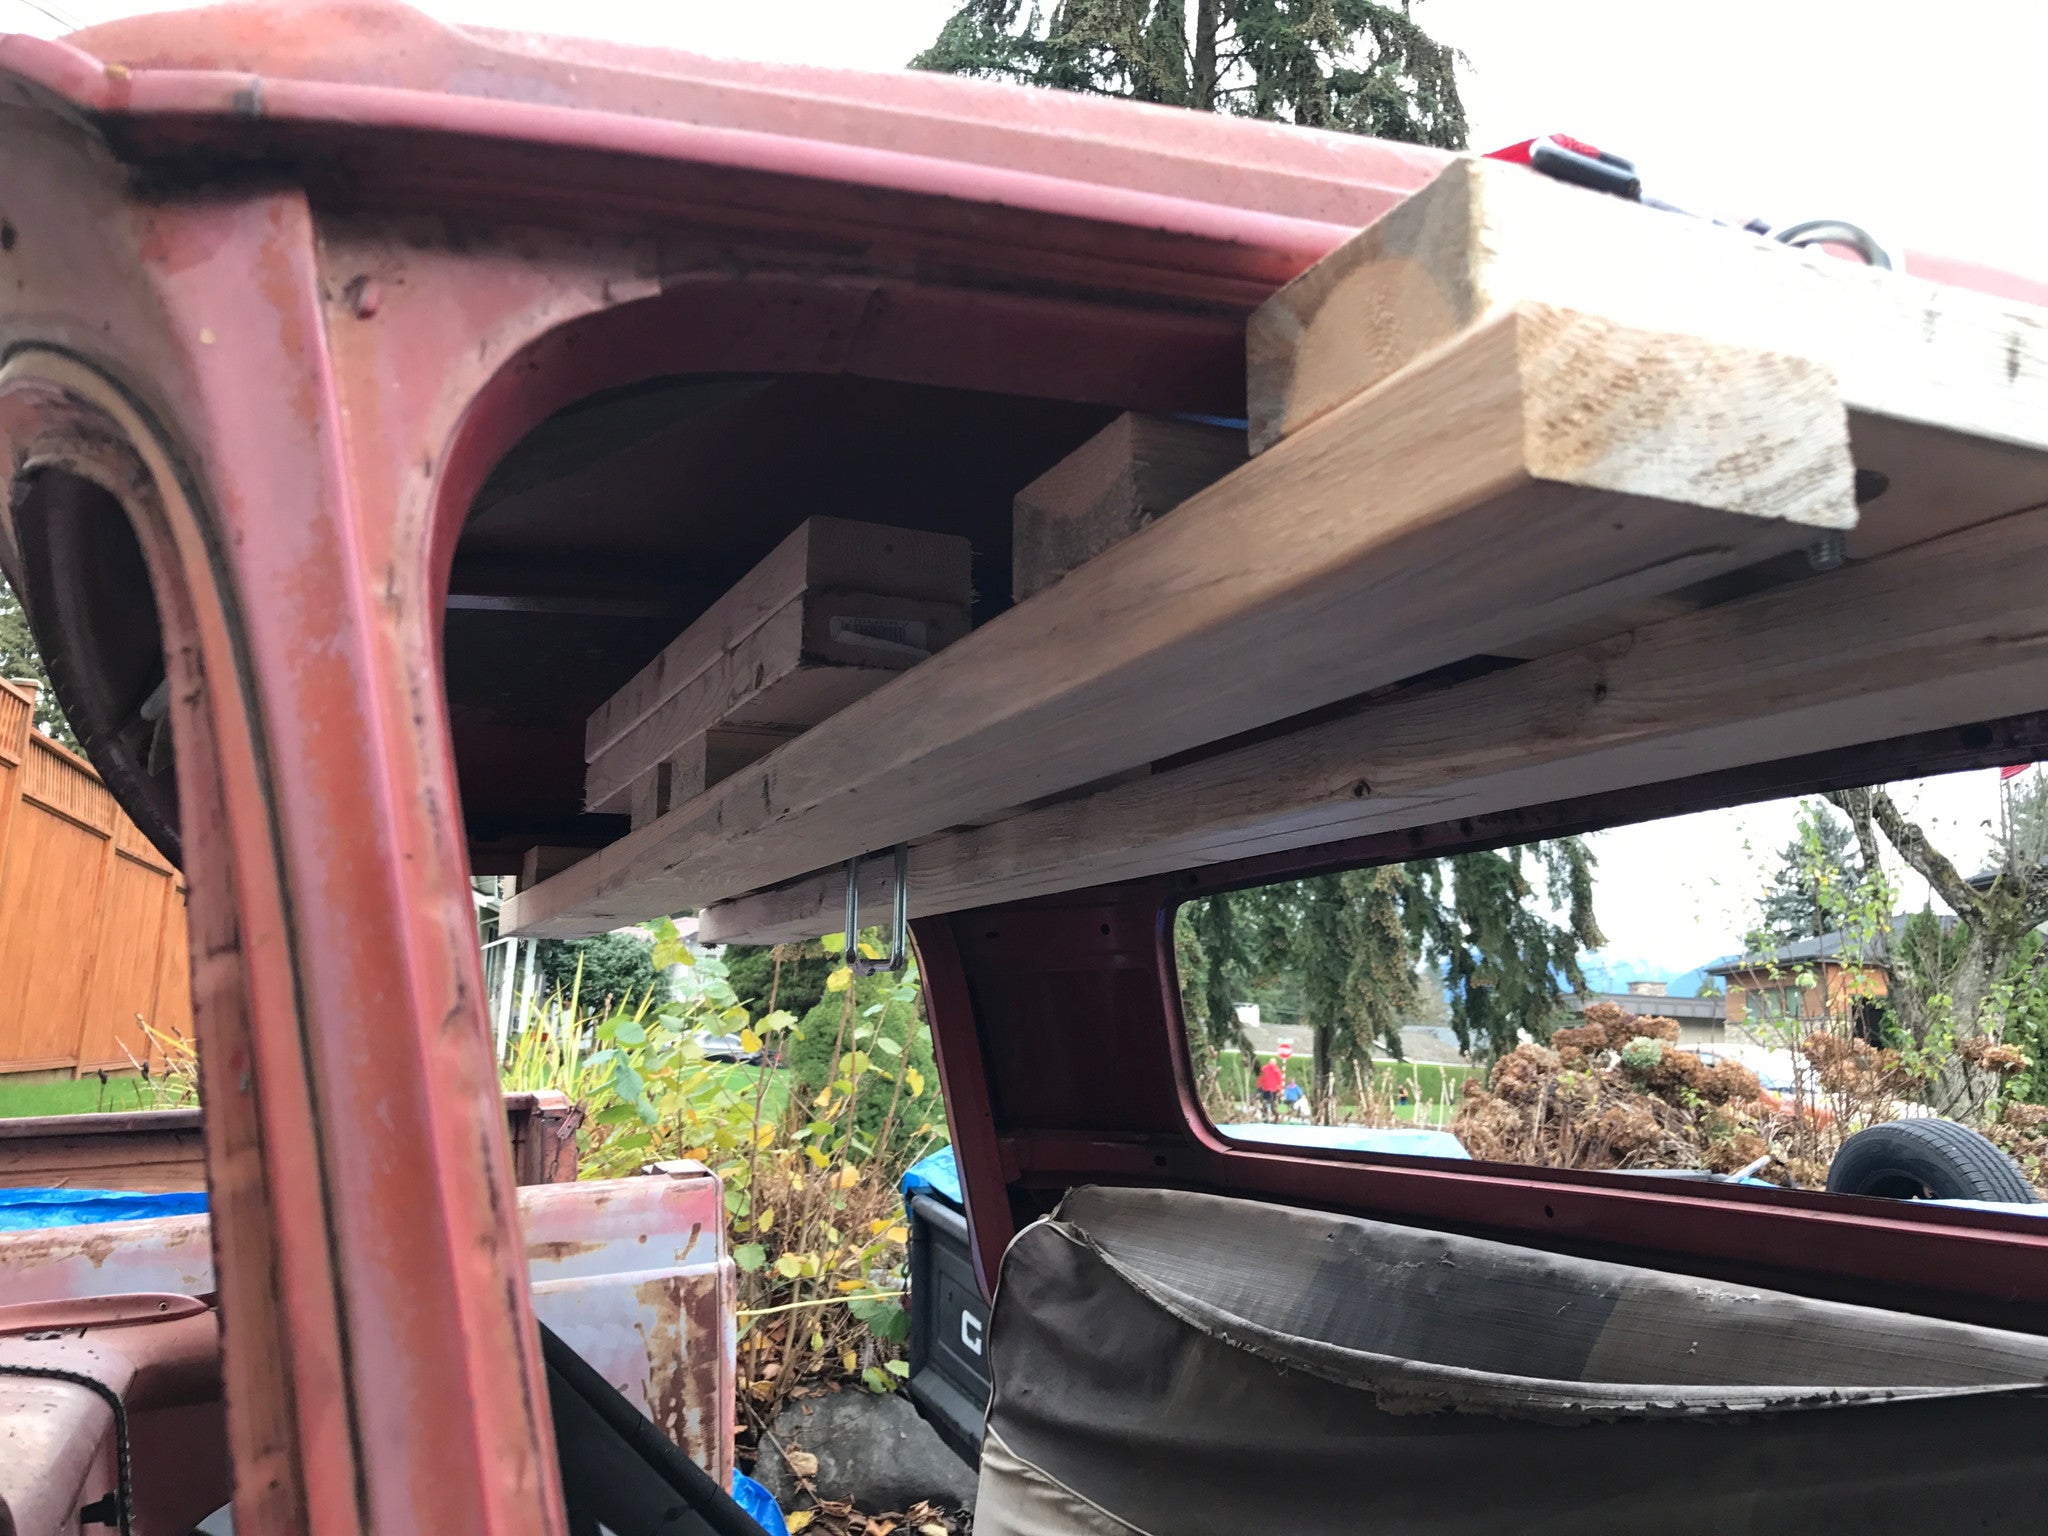 How to Build a Truck Cab Lift - Using an Engine Hoist to Remove a Truck Cab